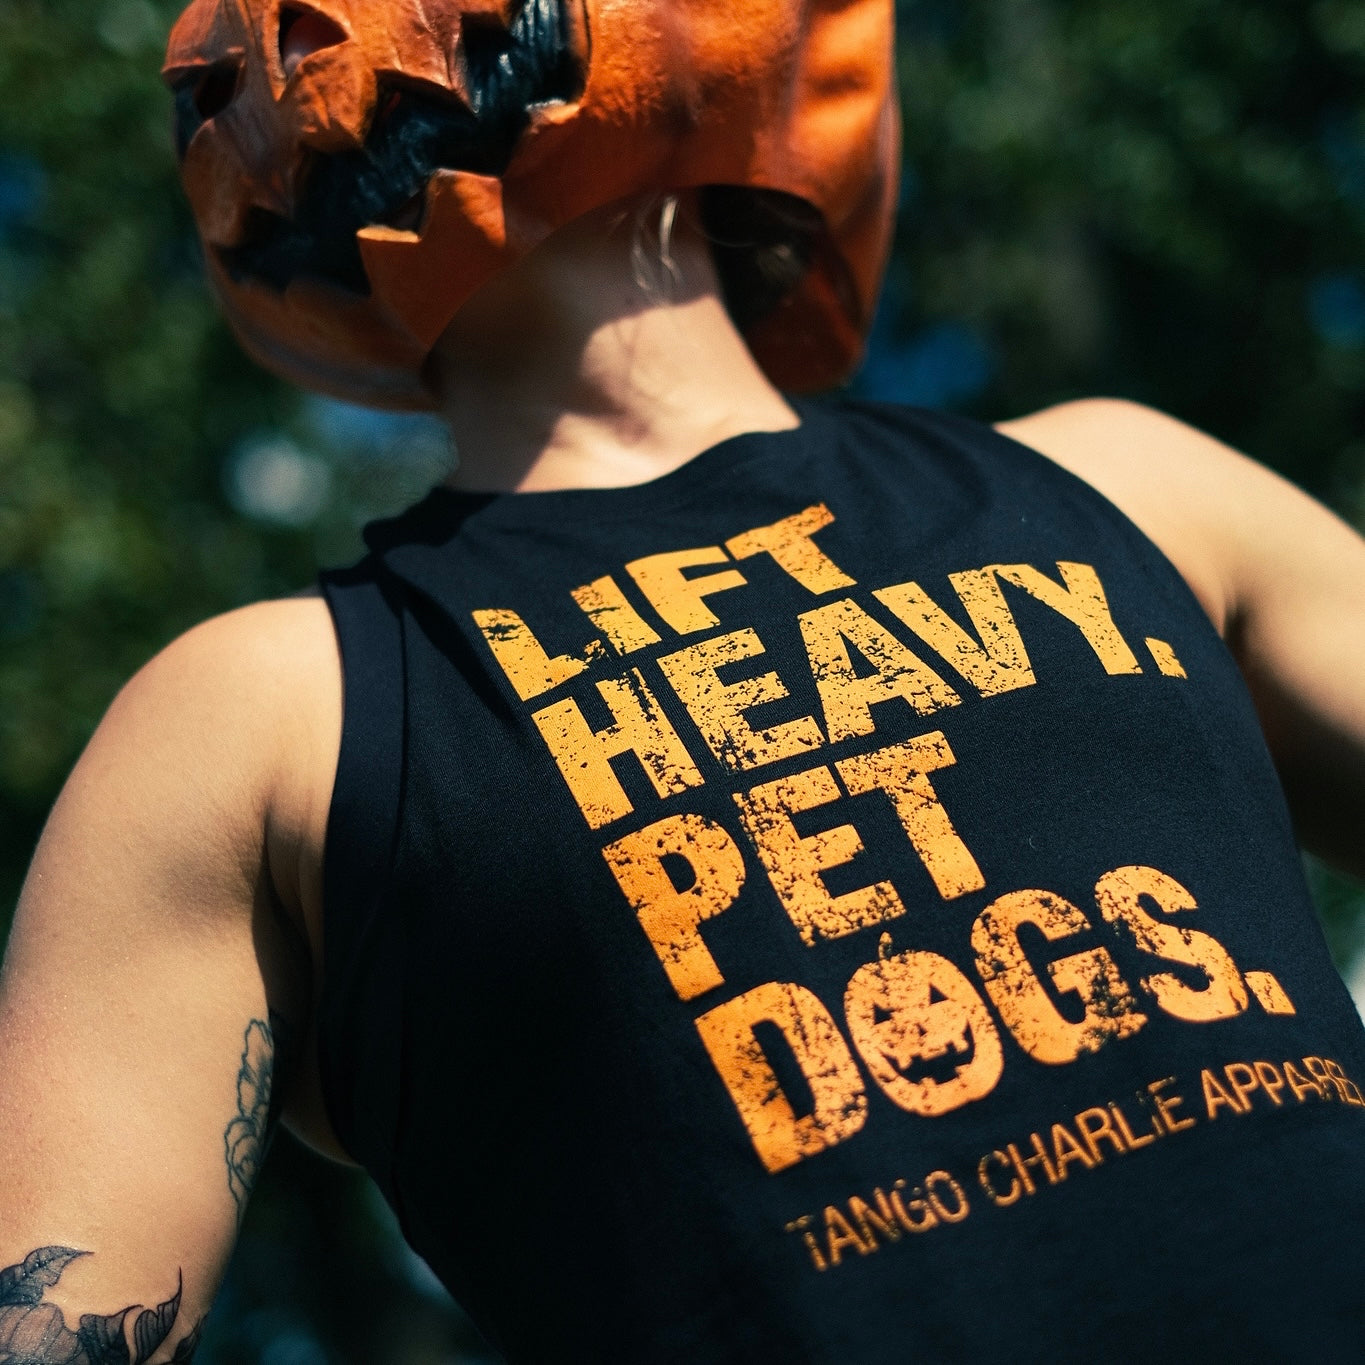 Lift Heavy Pet Dogs Gym & Workout Gift For Weightlifters T-Shirt – Teezou  Store